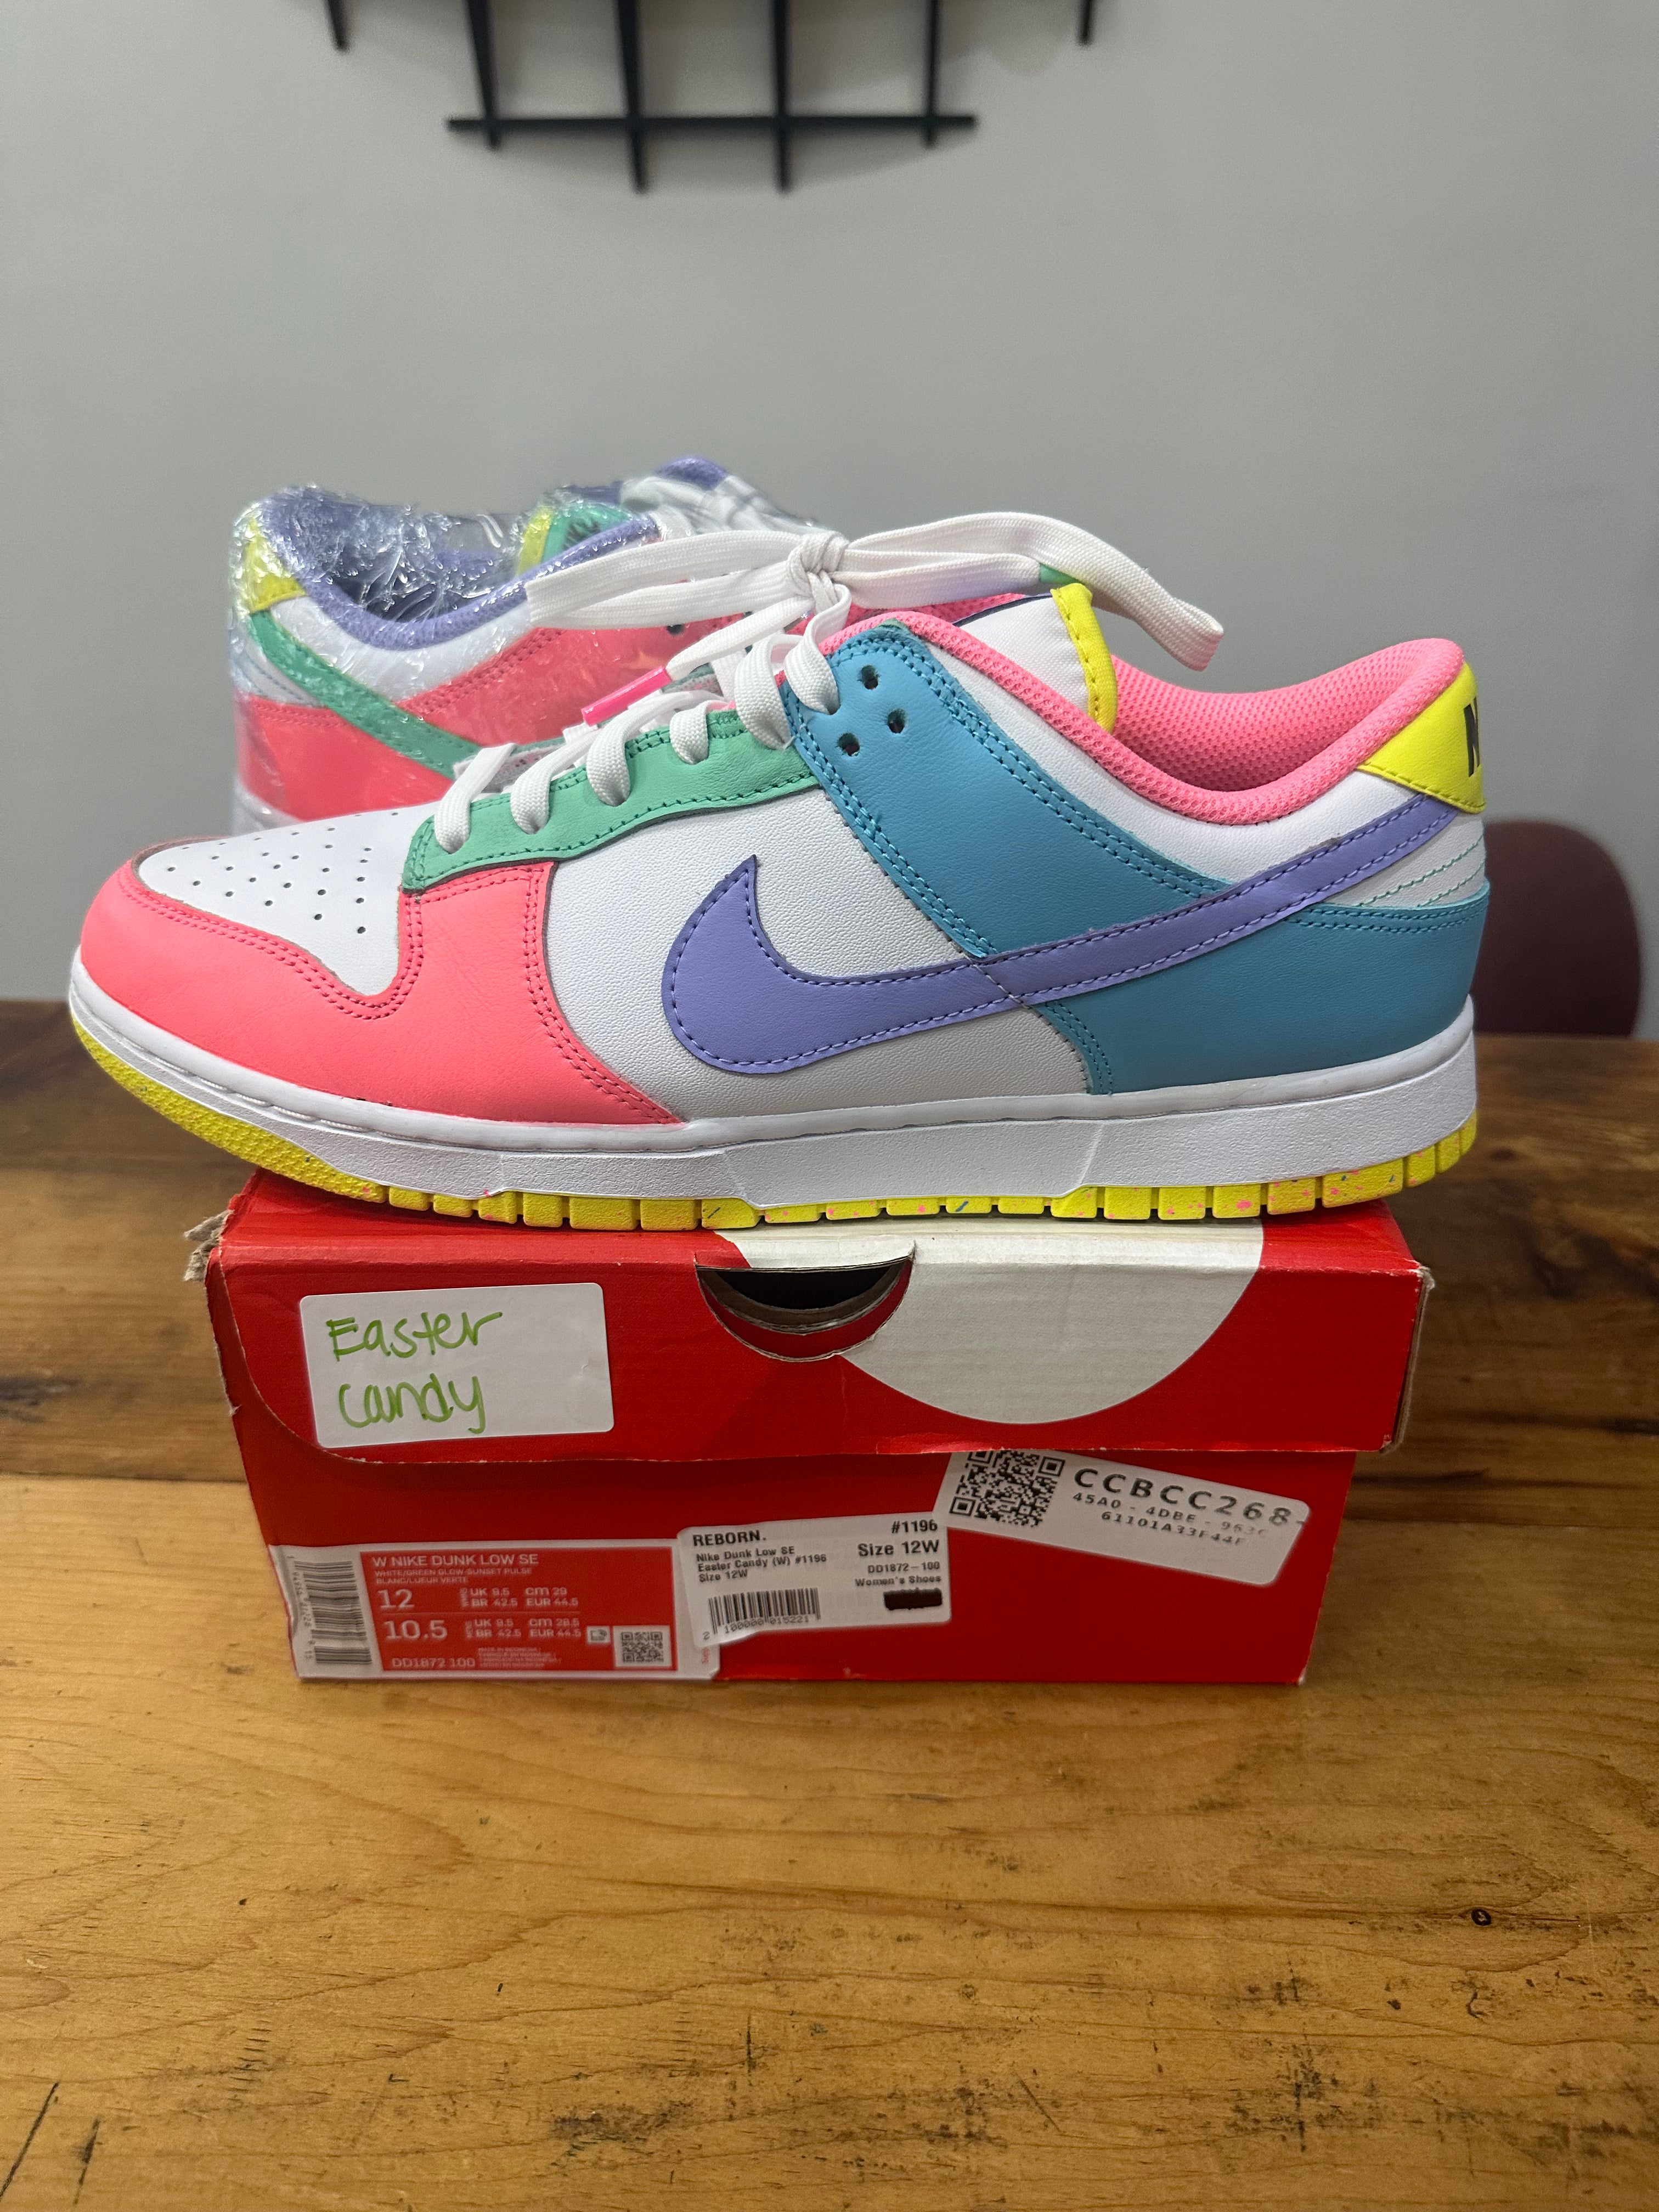 Nike Dunk Low SE “Candy